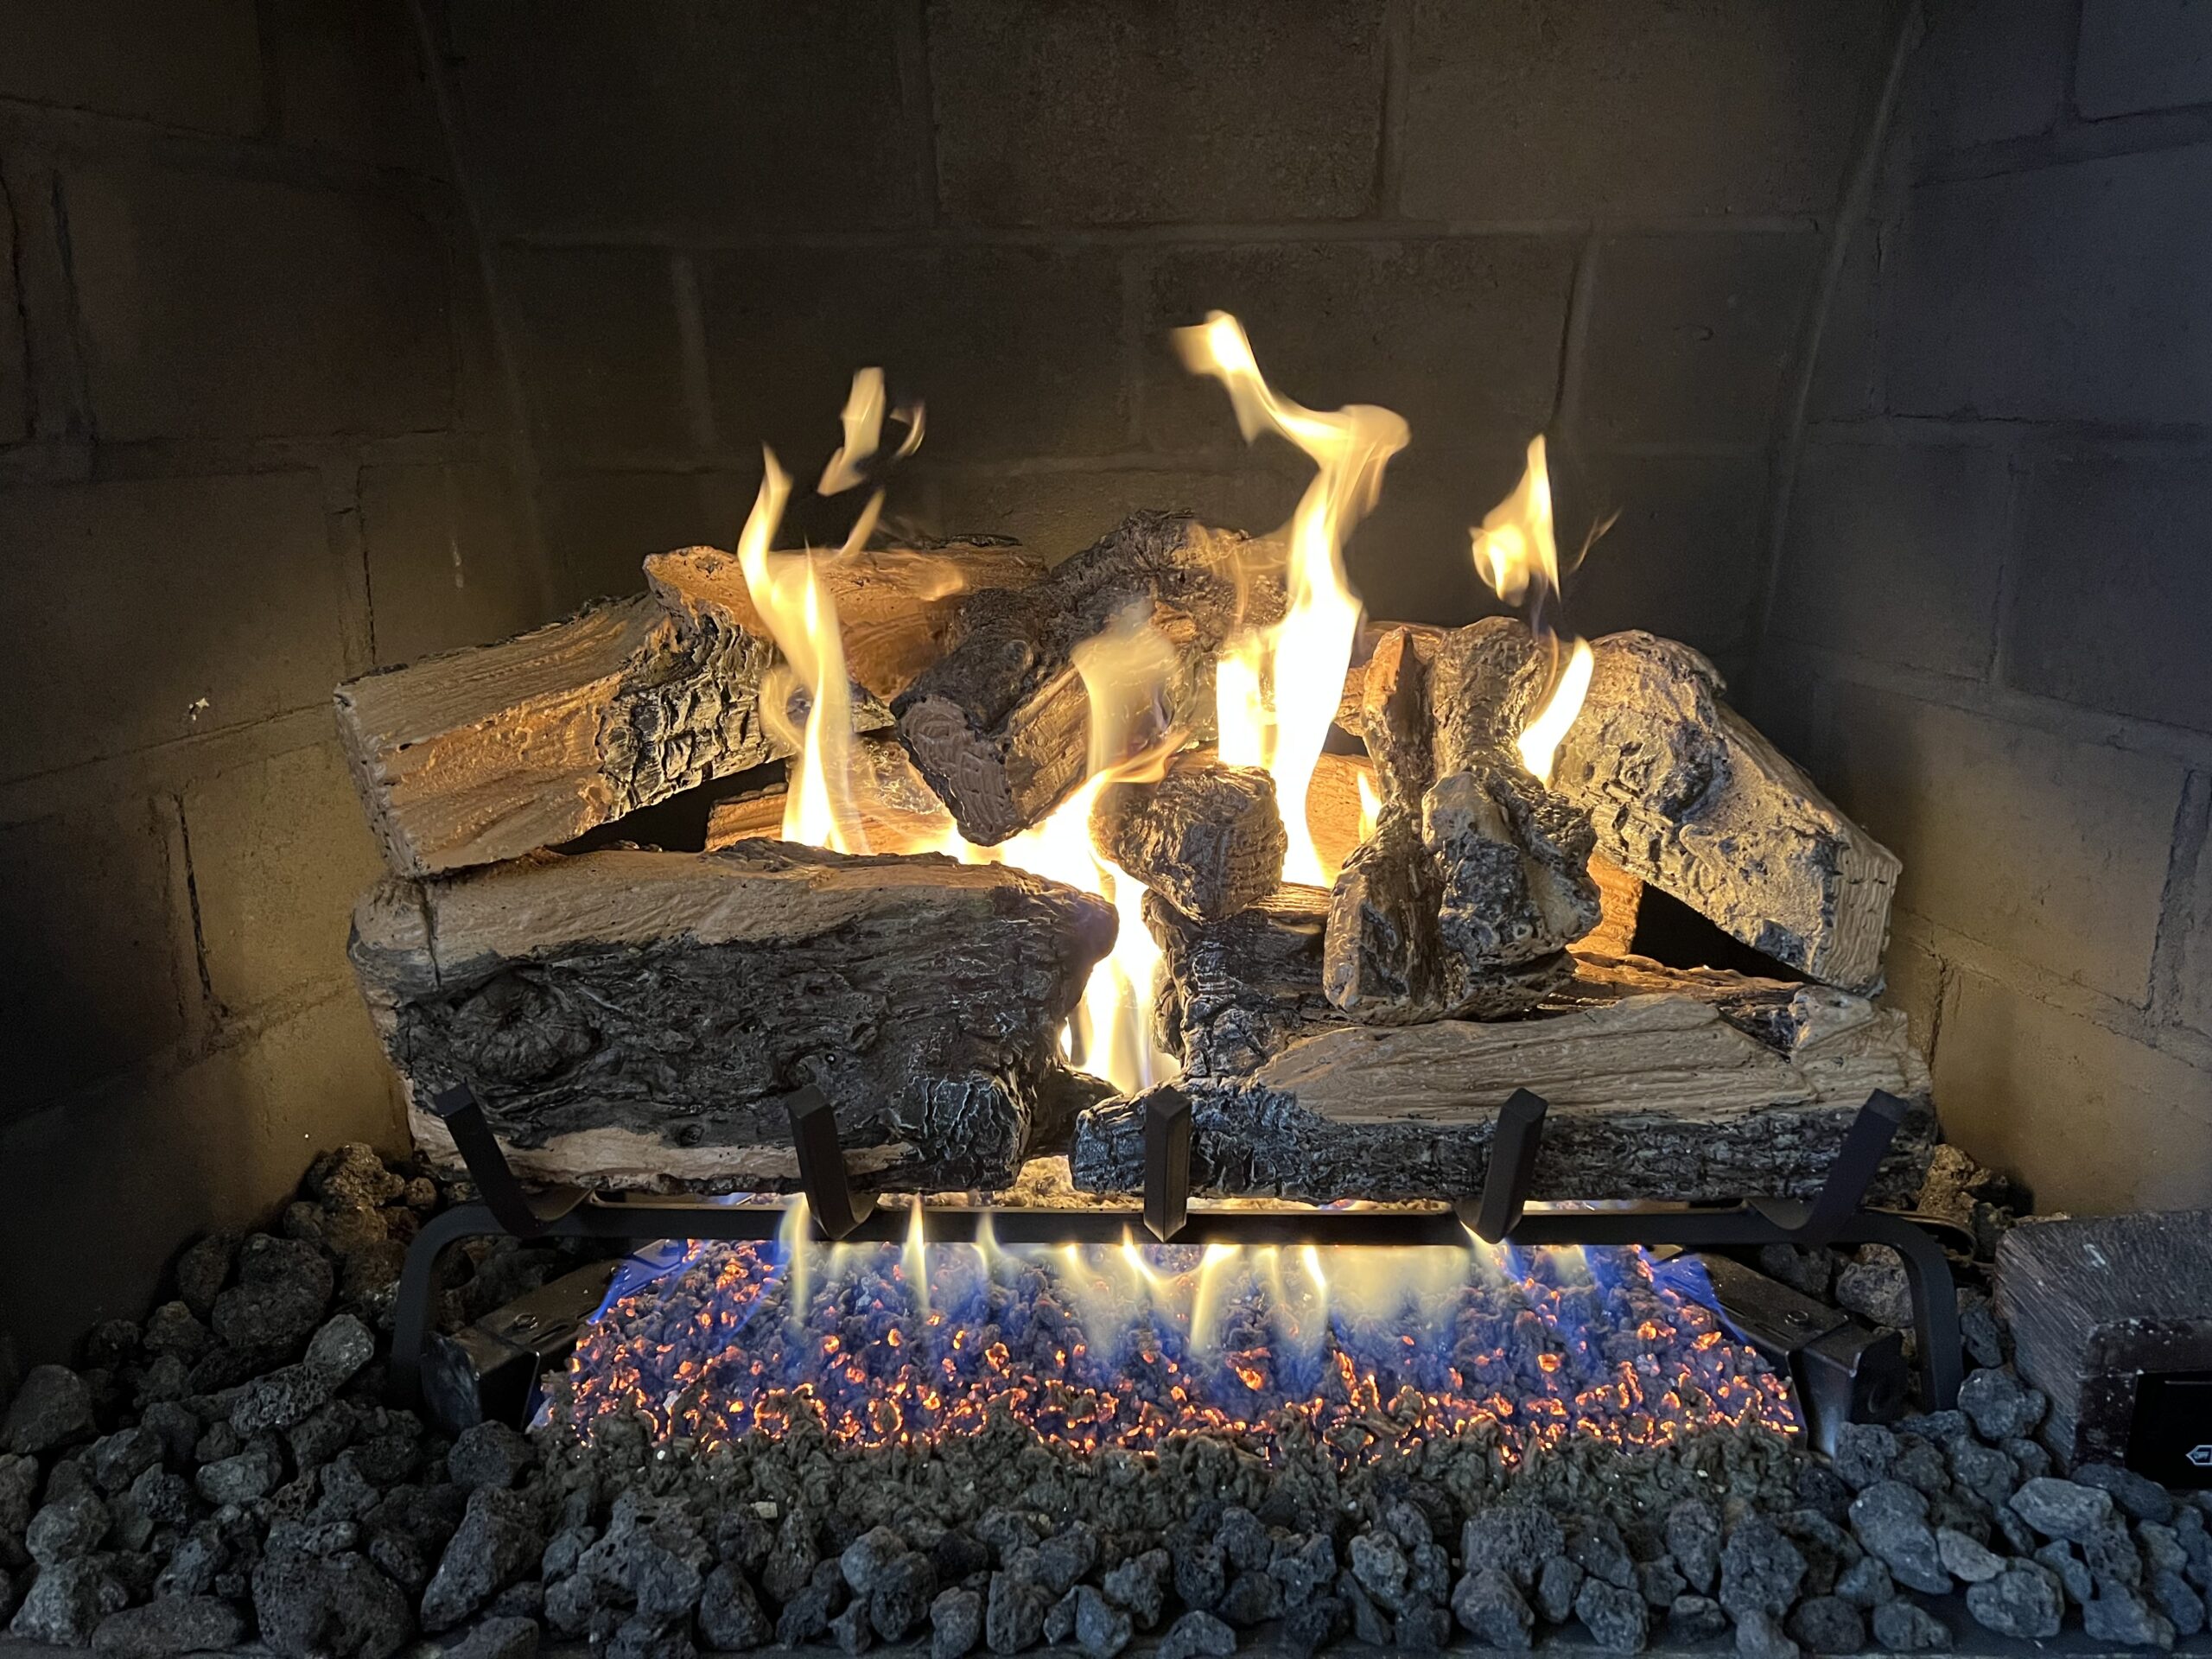 Gas log fireplace set placed above clear decorative rocks